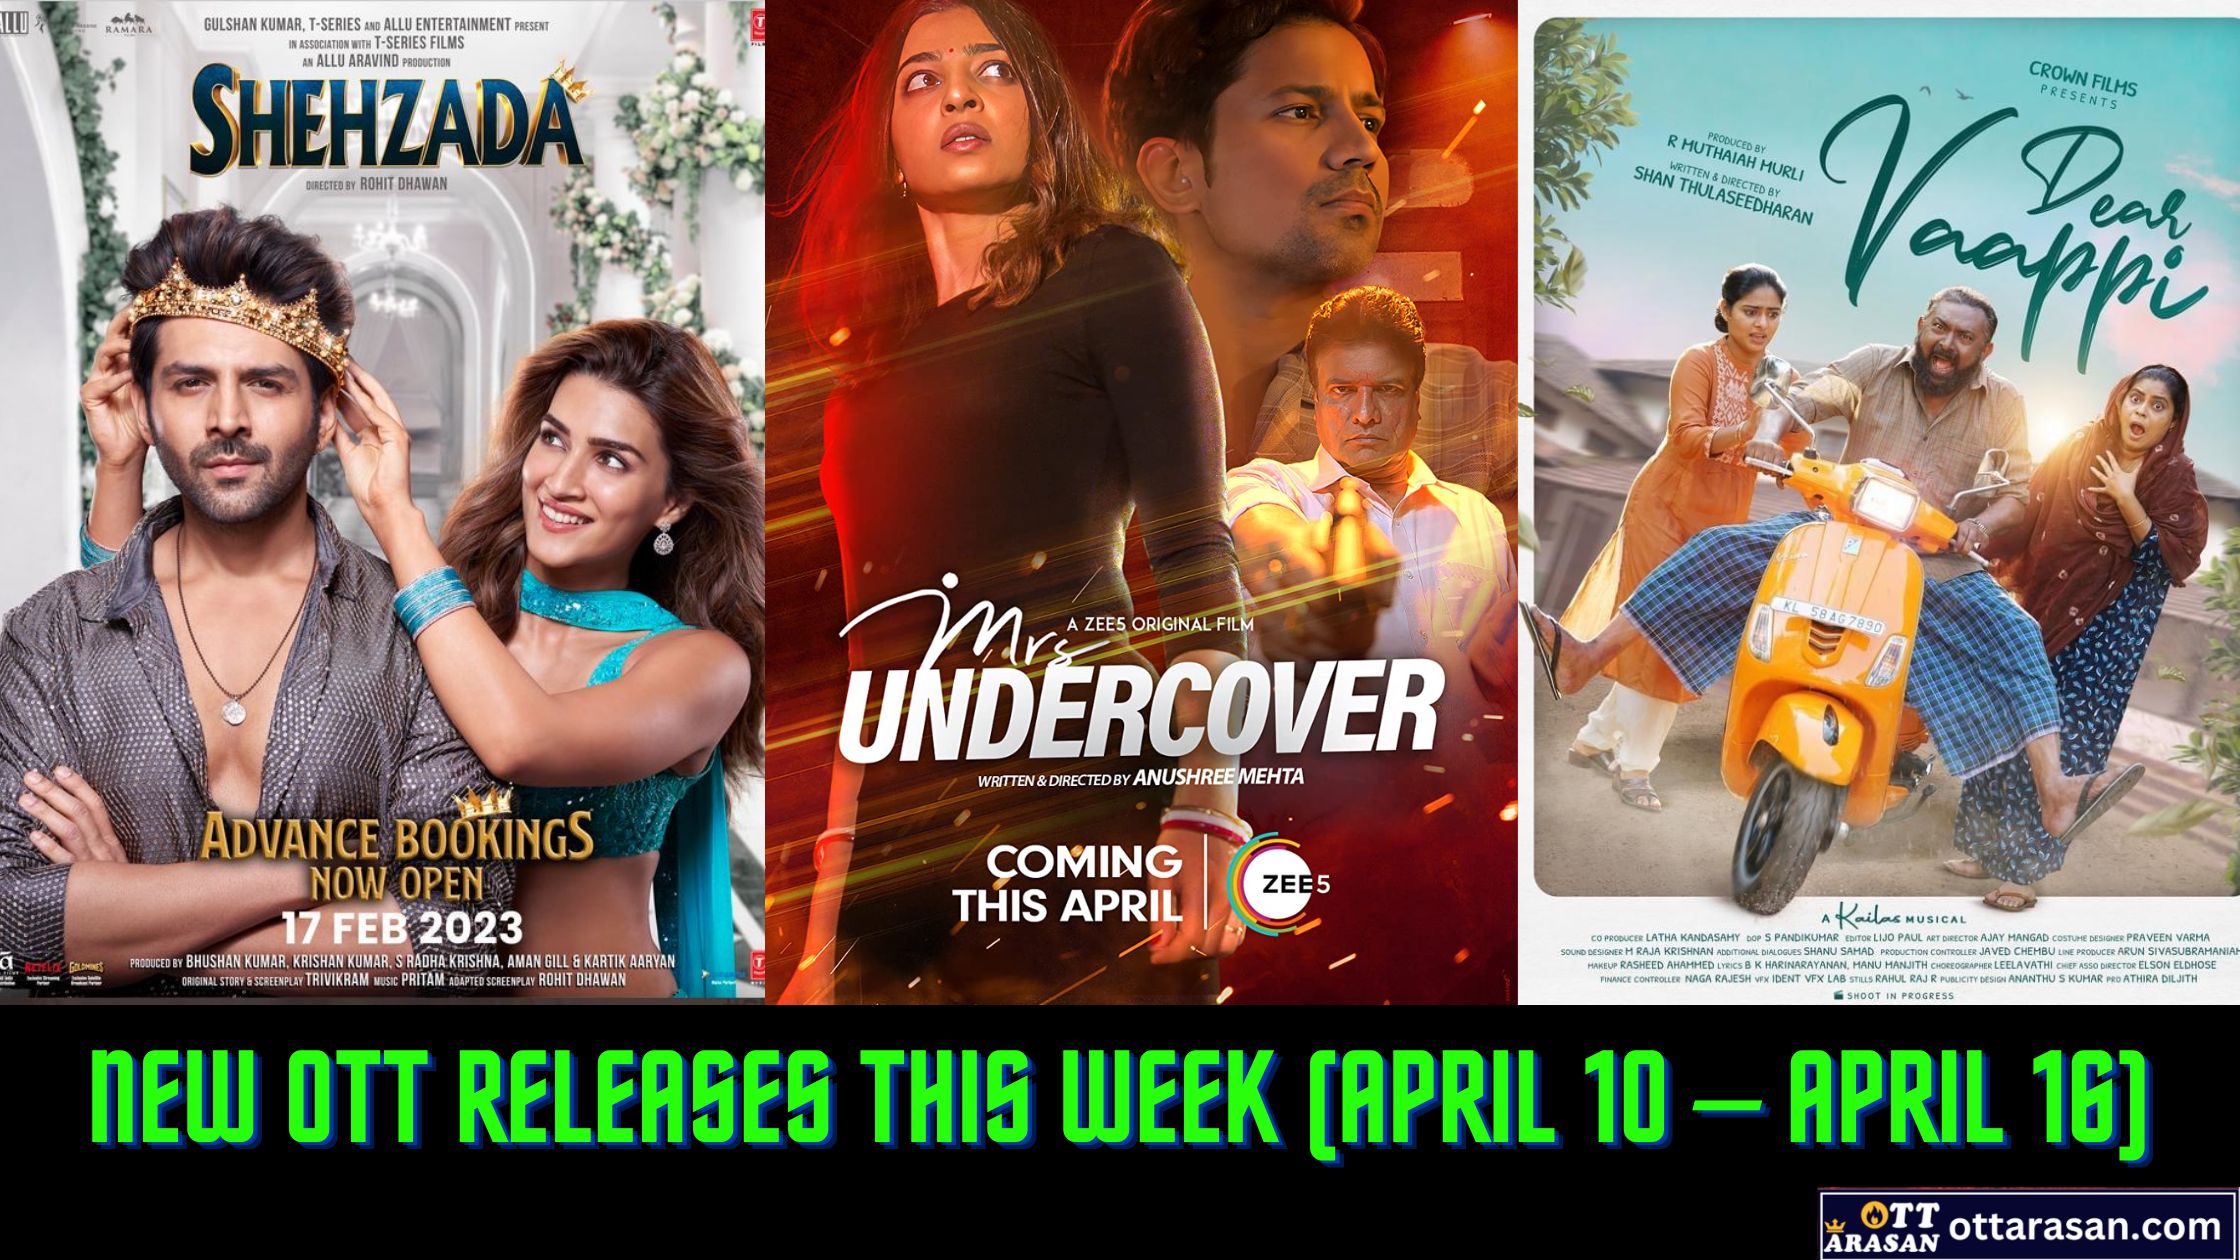 New OTT Releases this Week (April 10 – April 16)